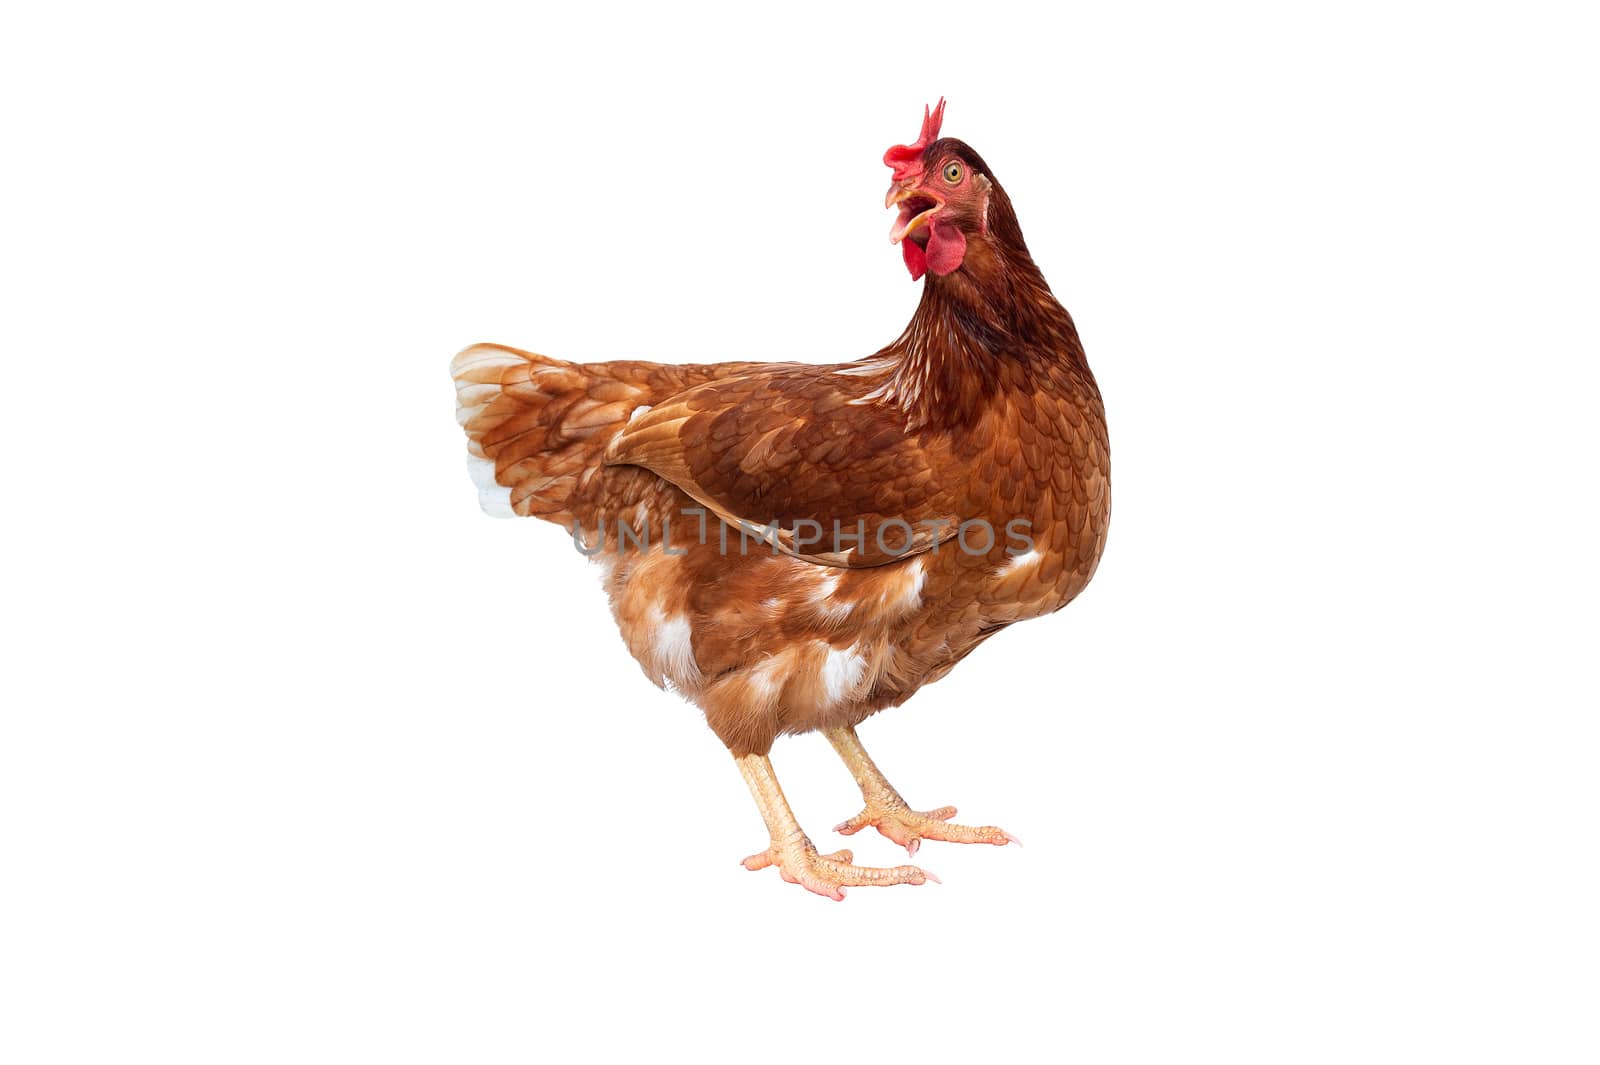 Brown hen isolated on white background, Chicken isolated on white.